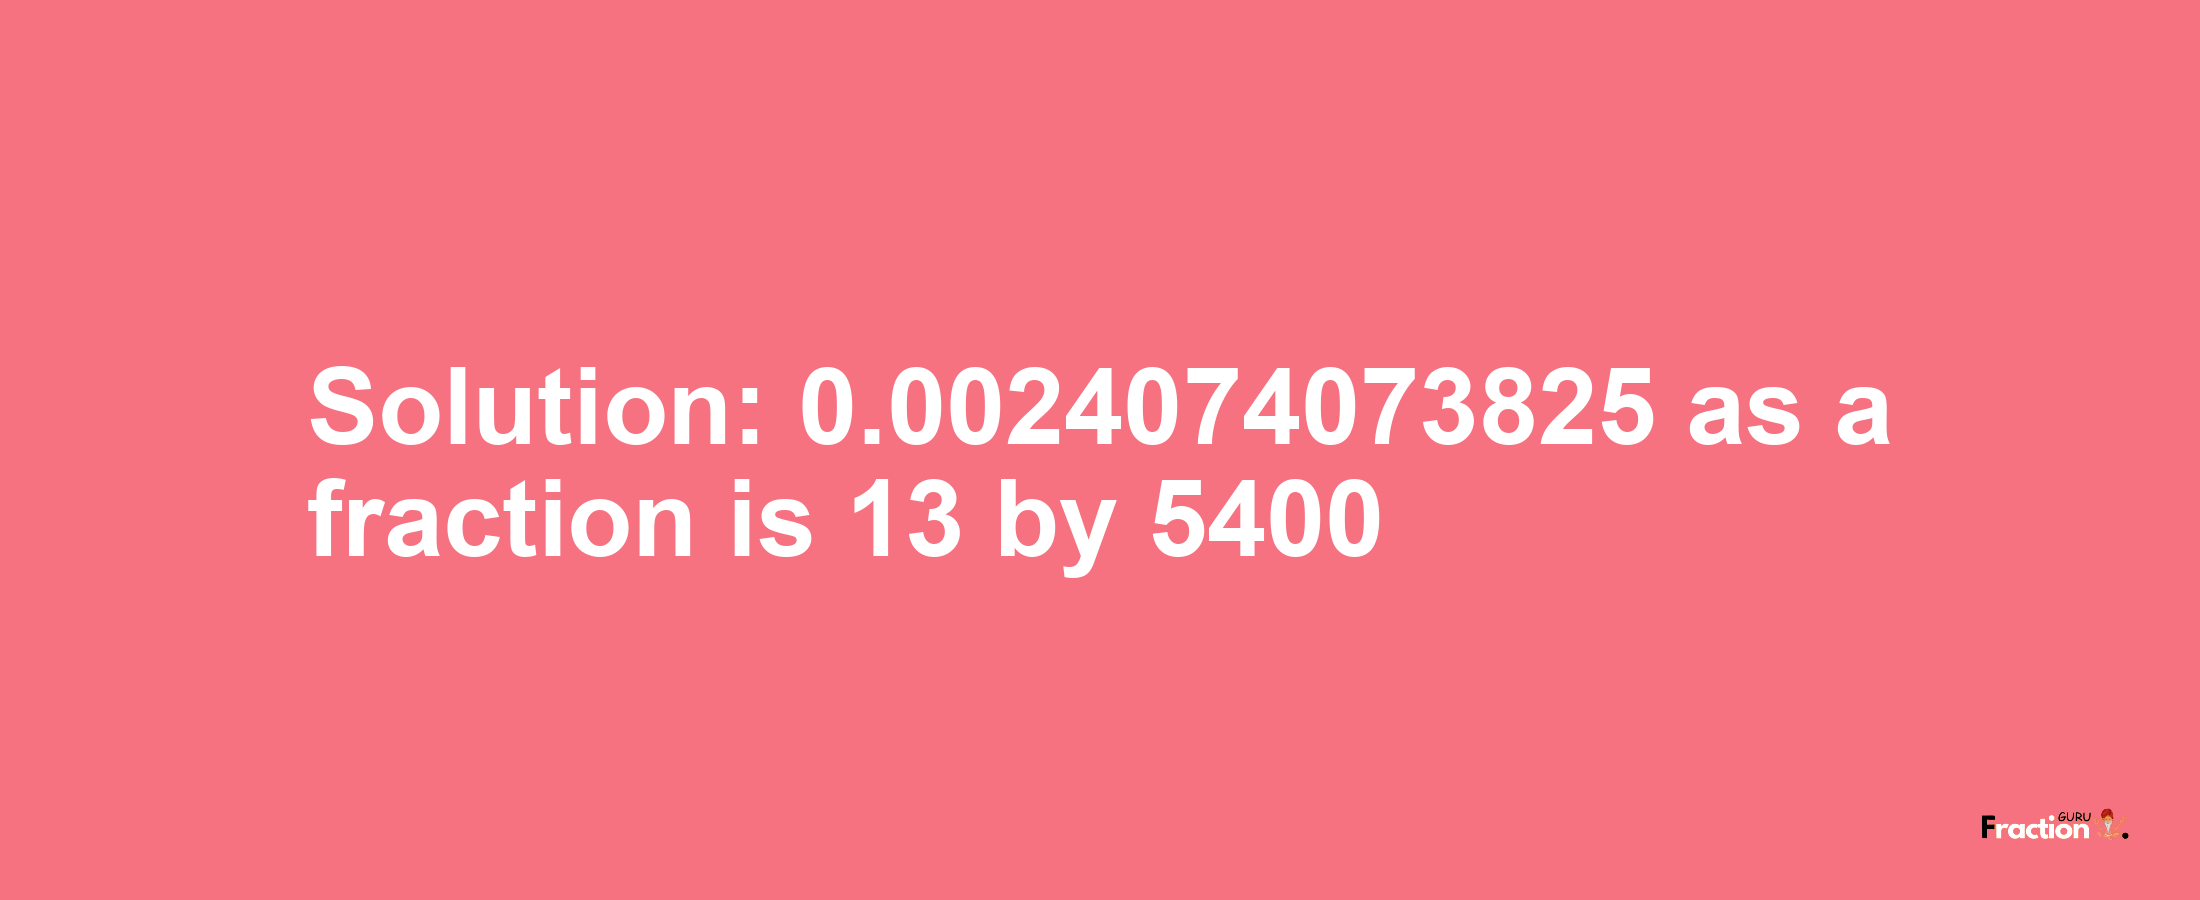 Solution:0.0024074073825 as a fraction is 13/5400